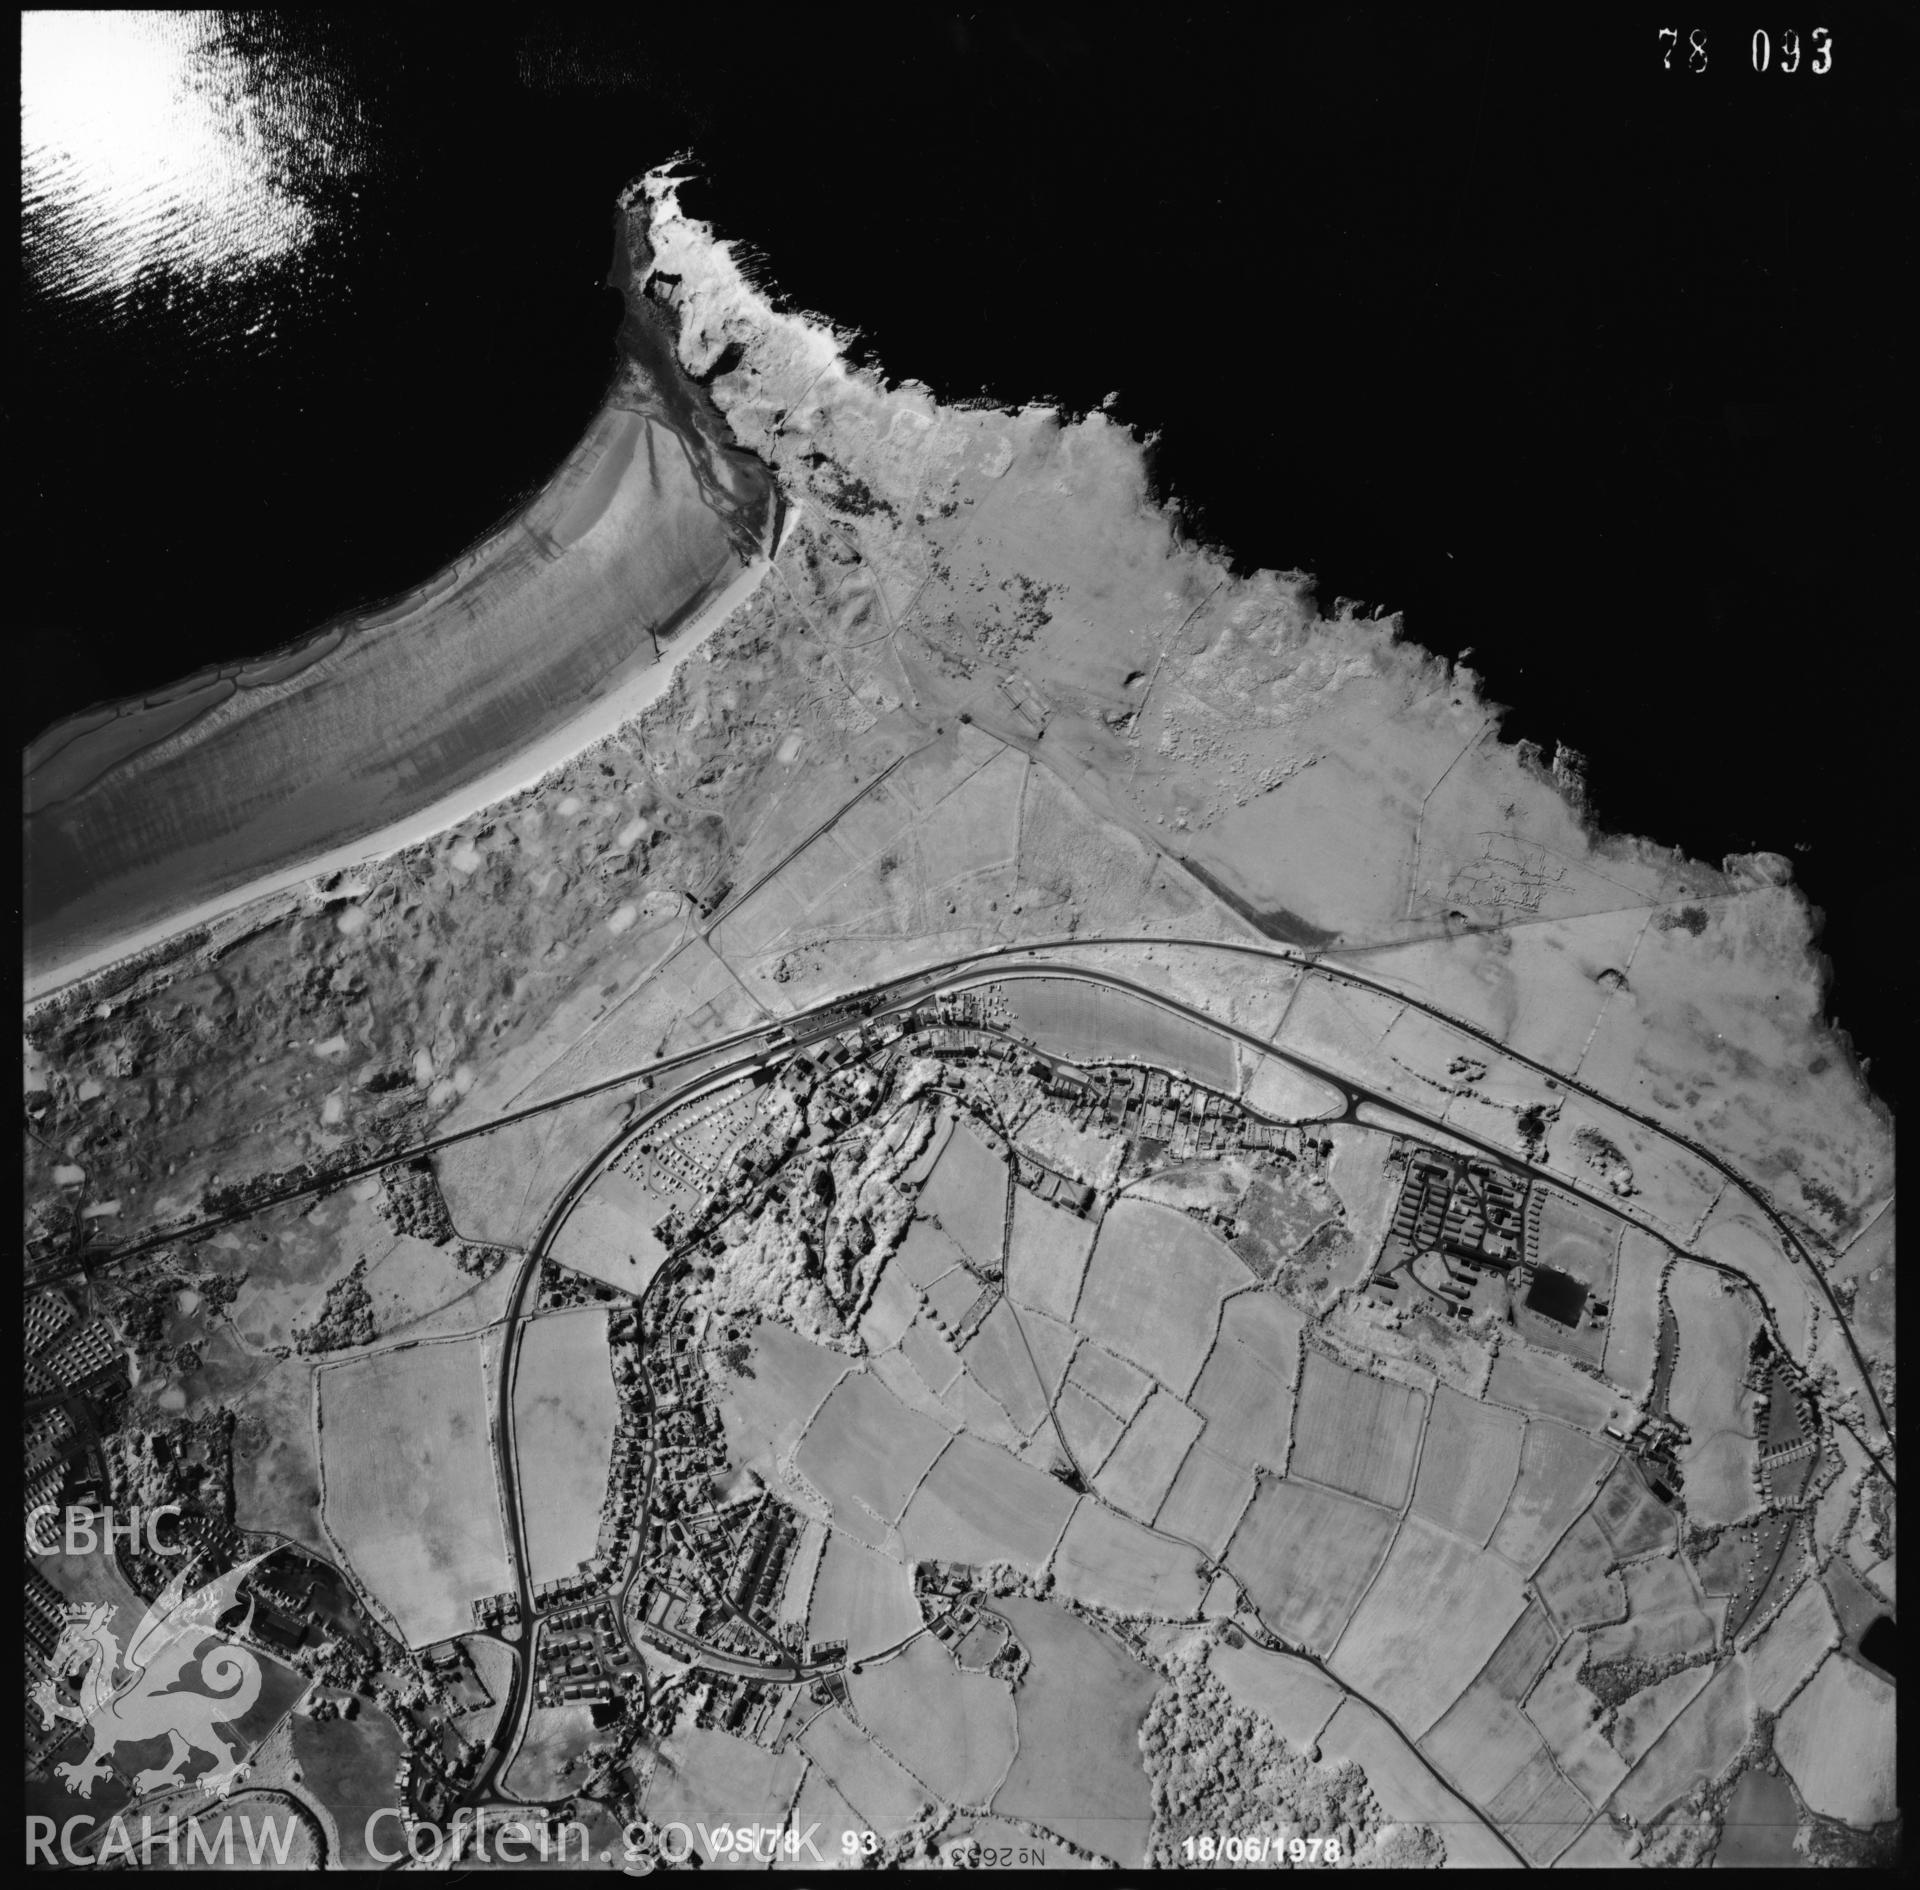 Digitized copy of an aerial photograph showing the Penally area, taken by Ordnance Survey, 1978.